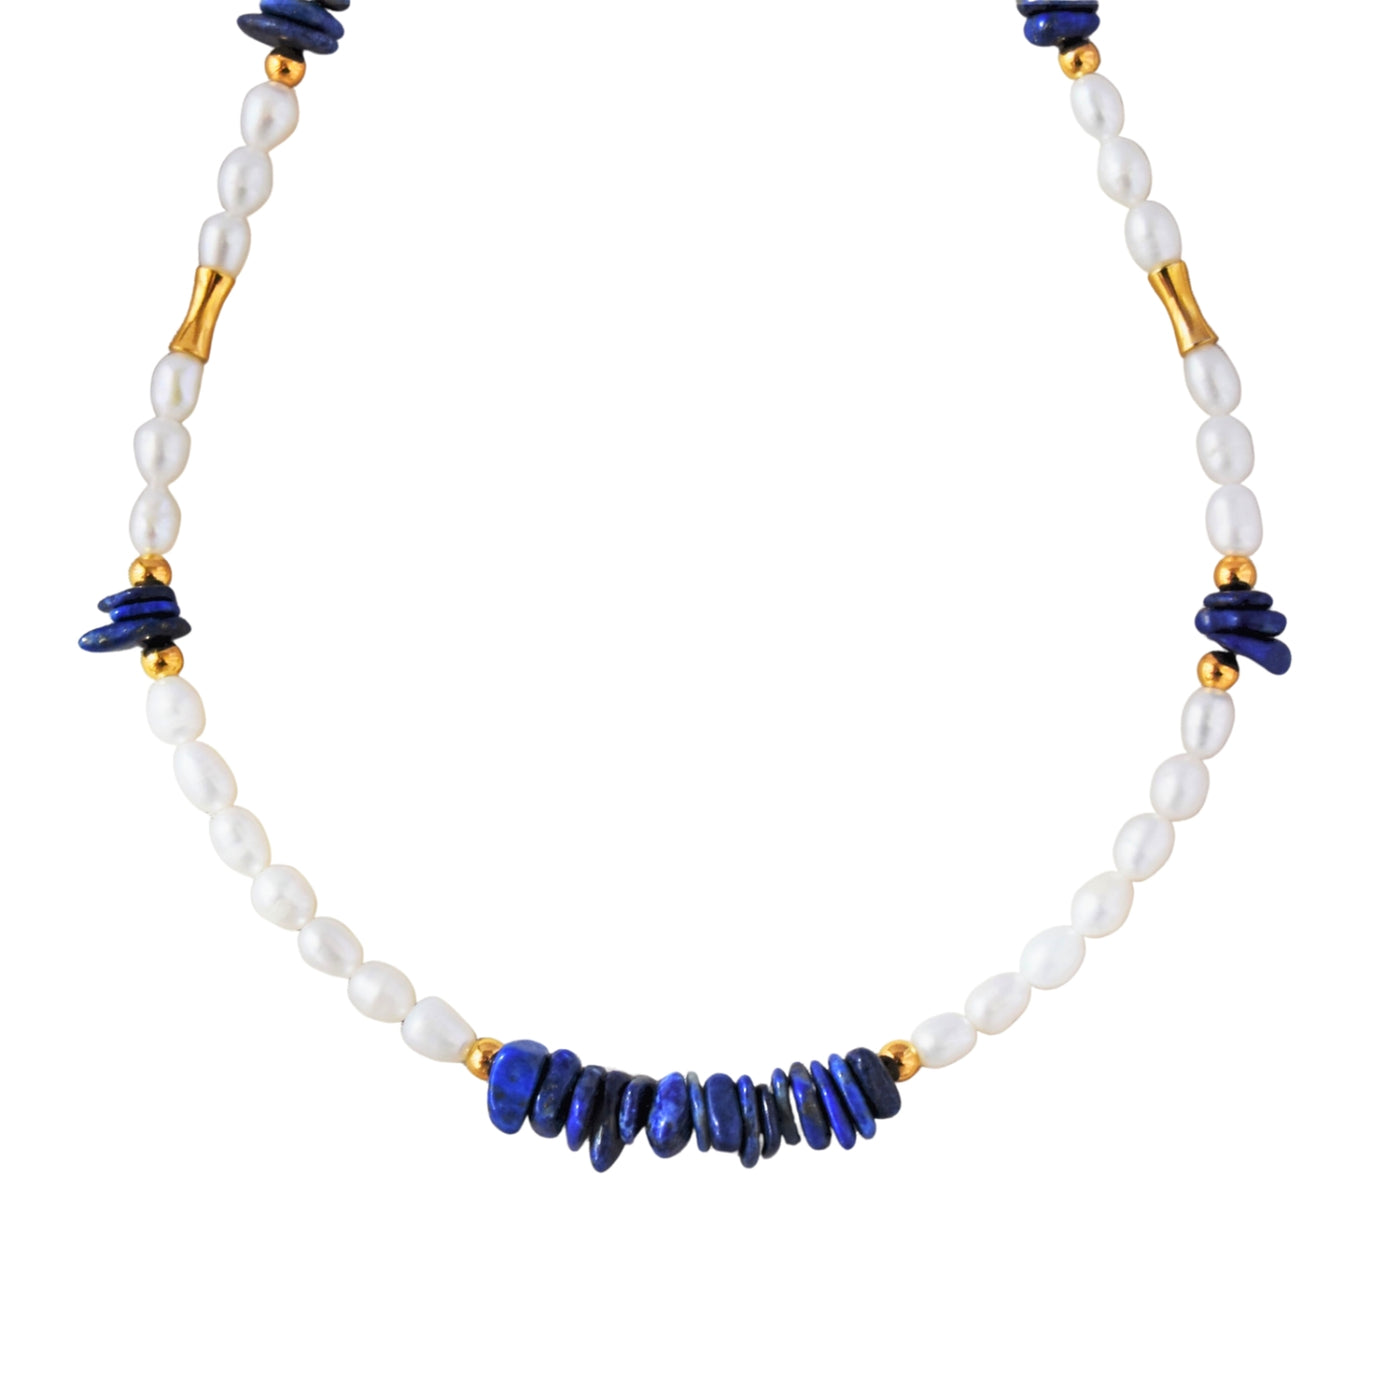 Necklace with freshwater pearls and lapis lazuli